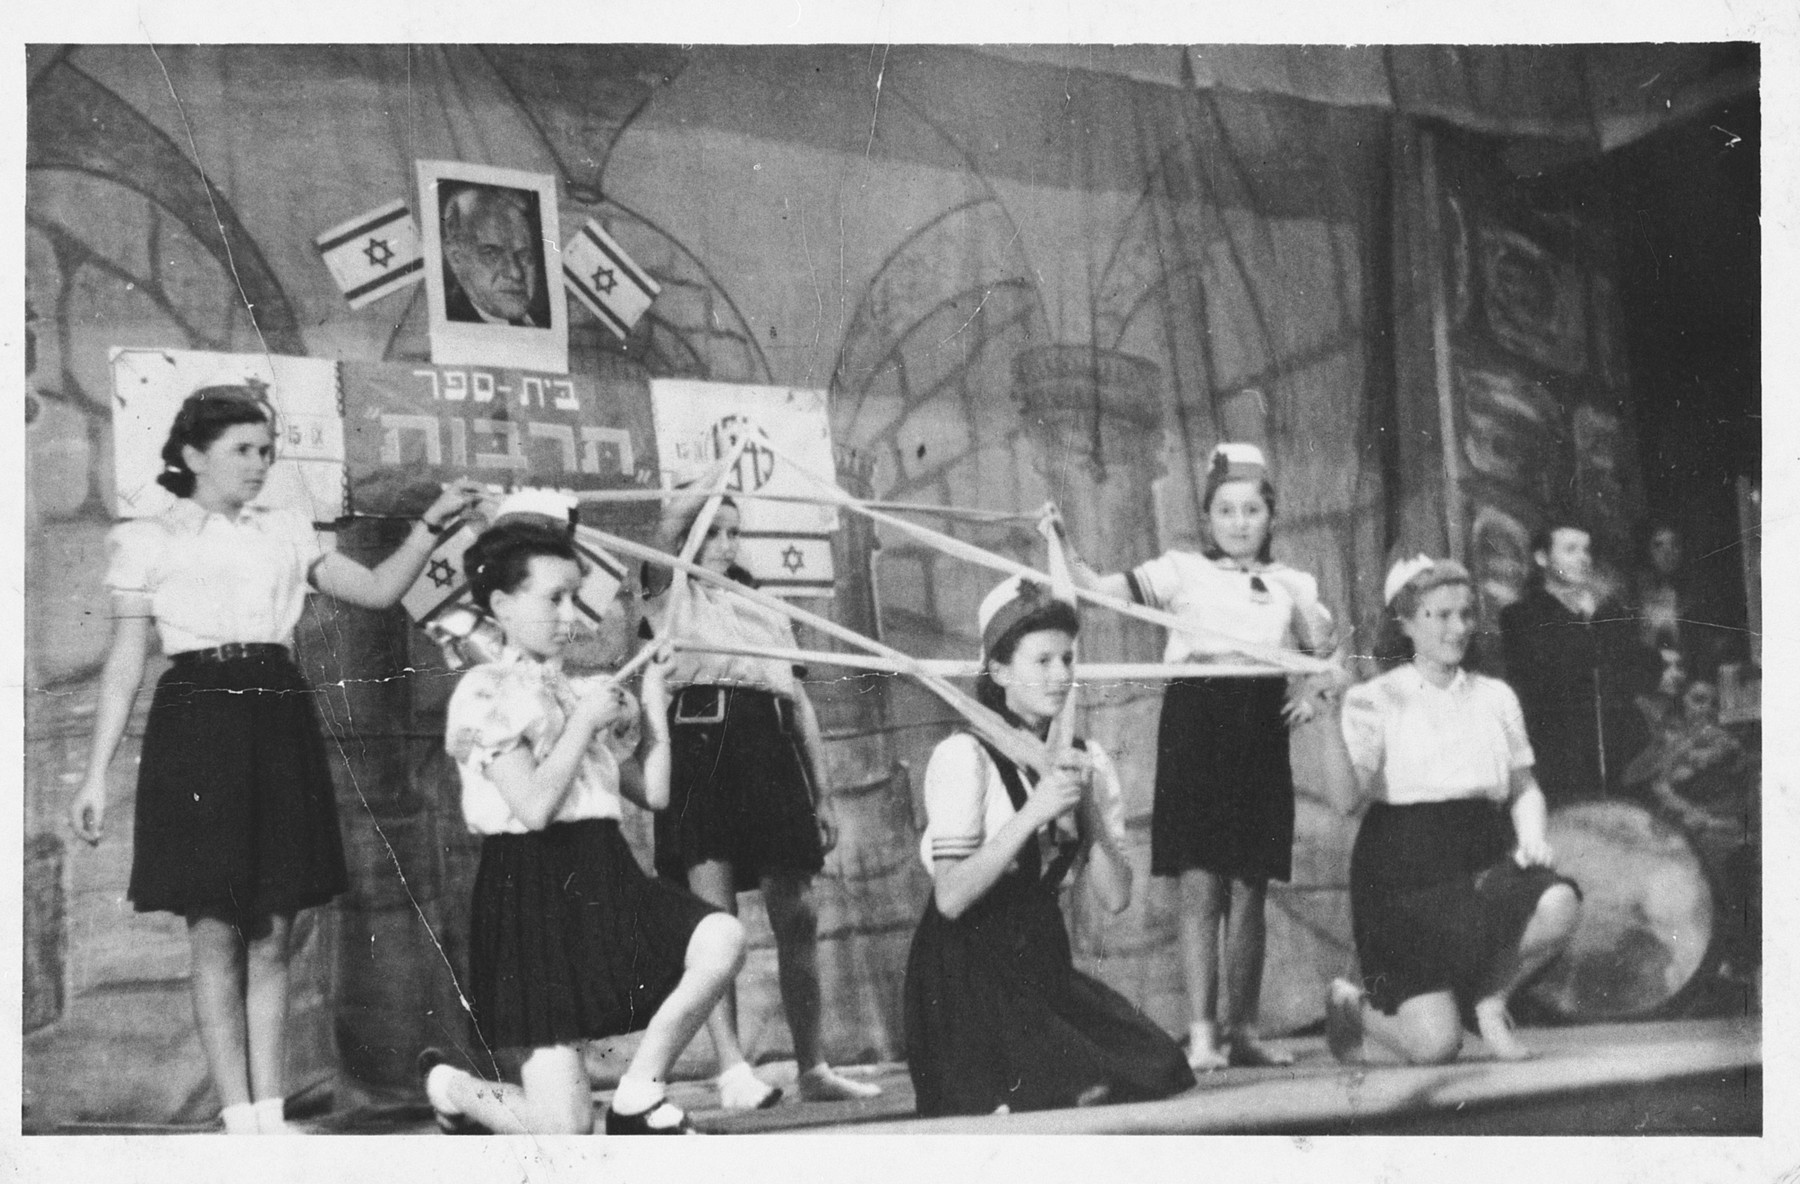 Children make a Jewish star out of ribbon during a performance at the Foehrenwald displaced persons camp.